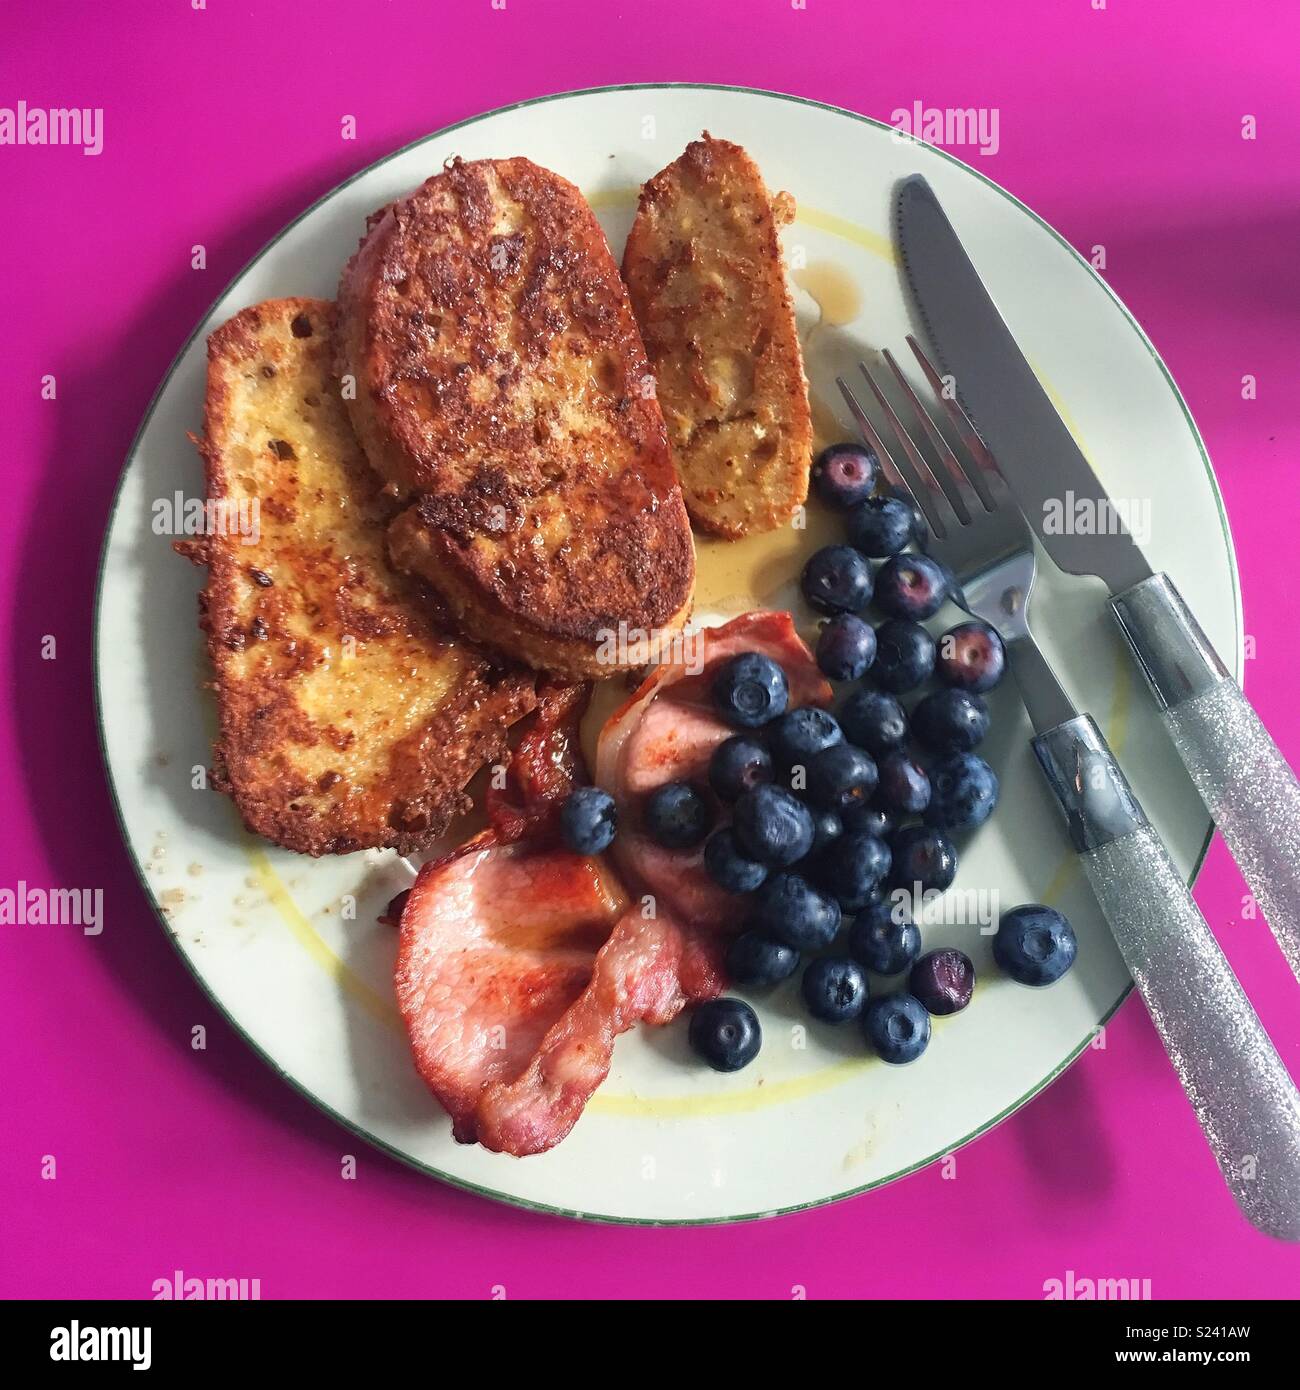 Homemade brunch of French toast, bacon, blueberries and maple syrup. Served on a vintage plate with glittery cutlery on a shocking pink kitchen worktop! Stock Photo